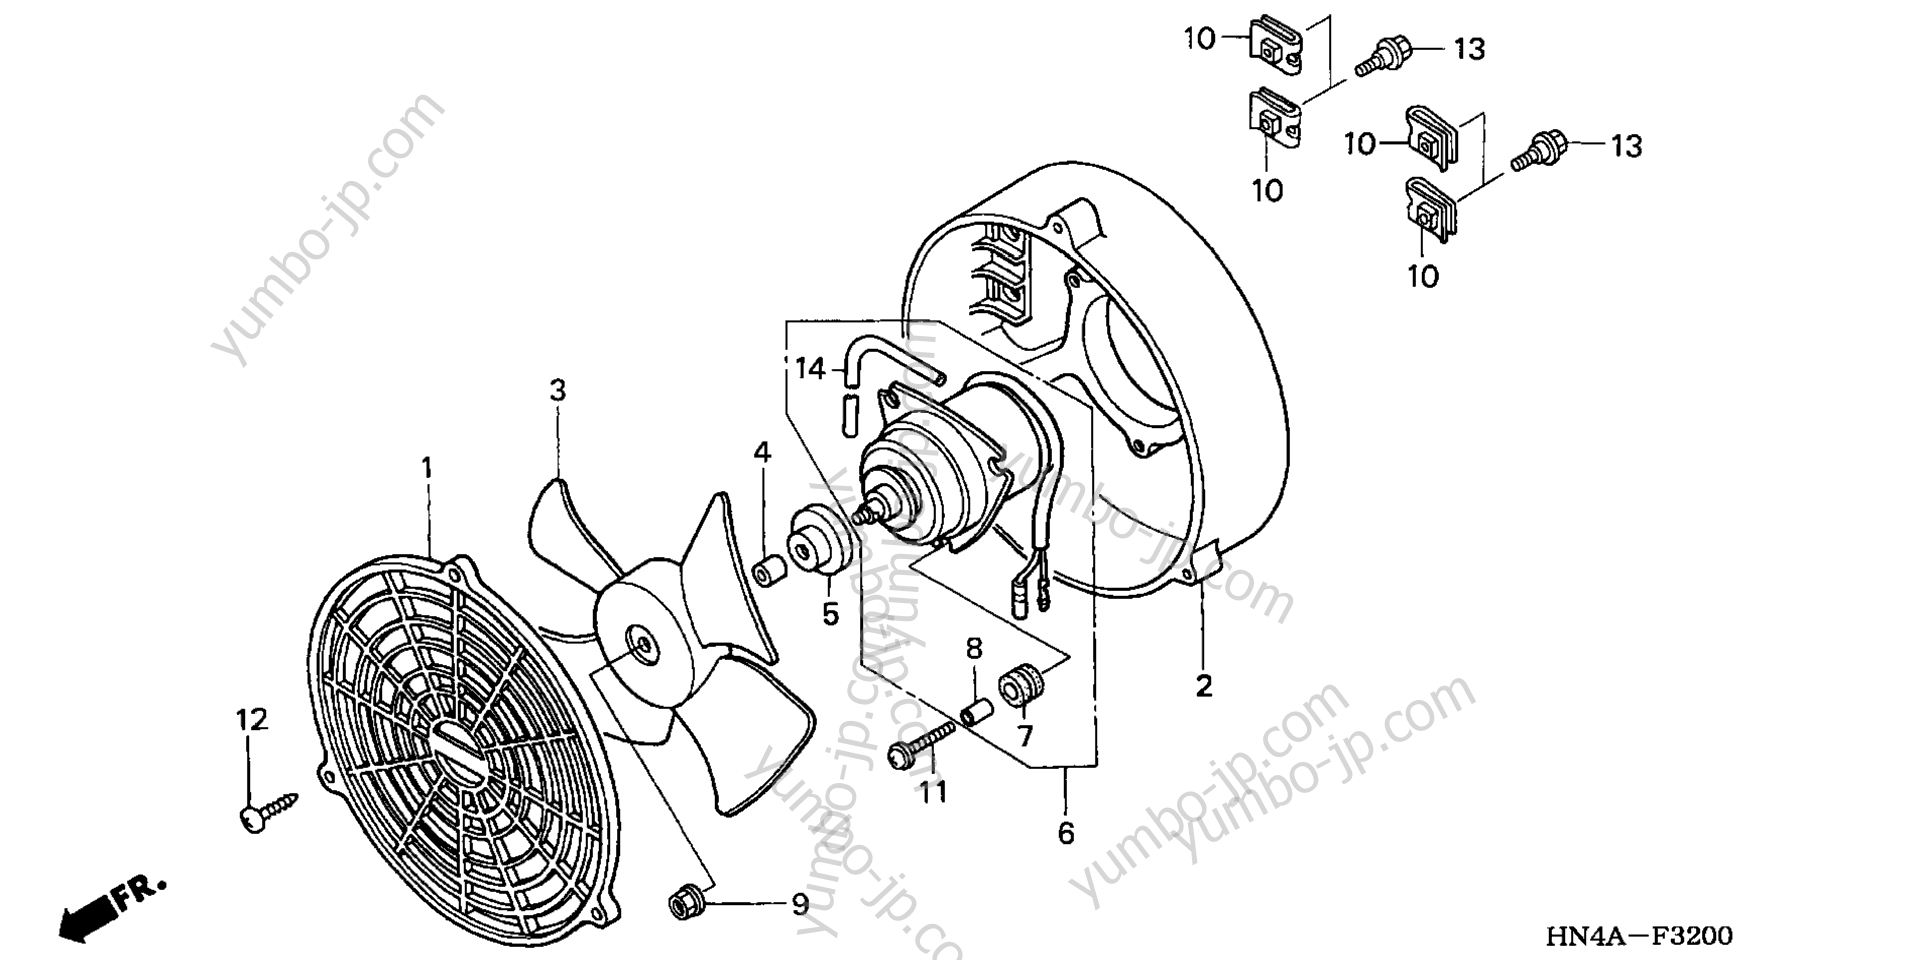 COOLING FAN for ATVs HONDA TRX350FE 2A 2002 year